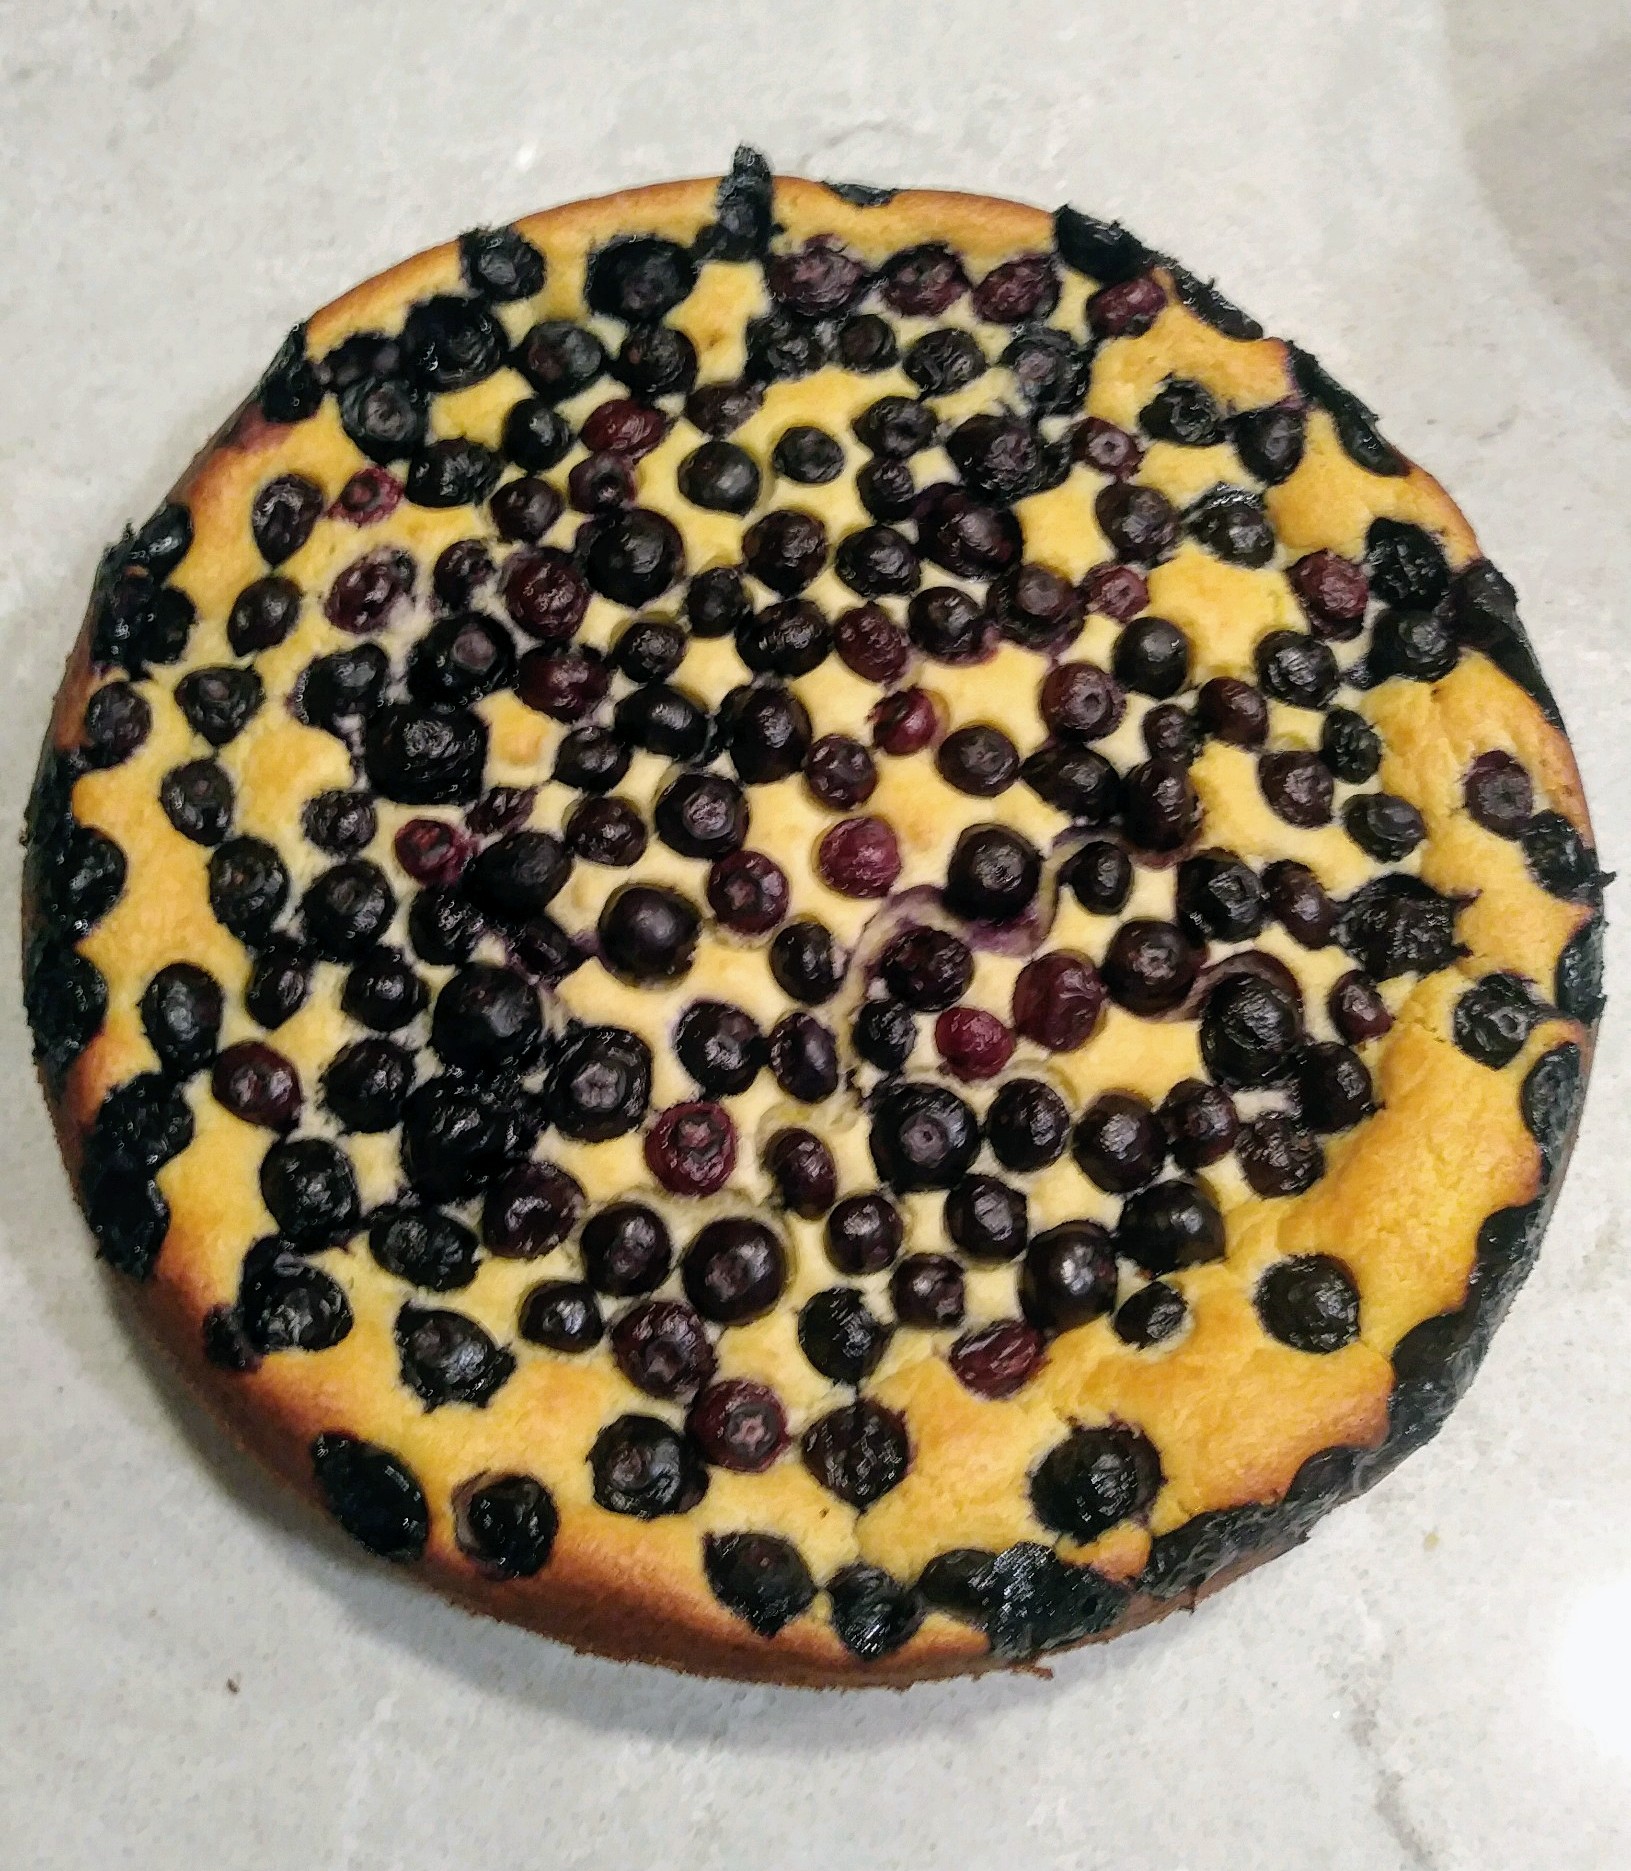 Blueberry Ricotta cake fresh from the oven